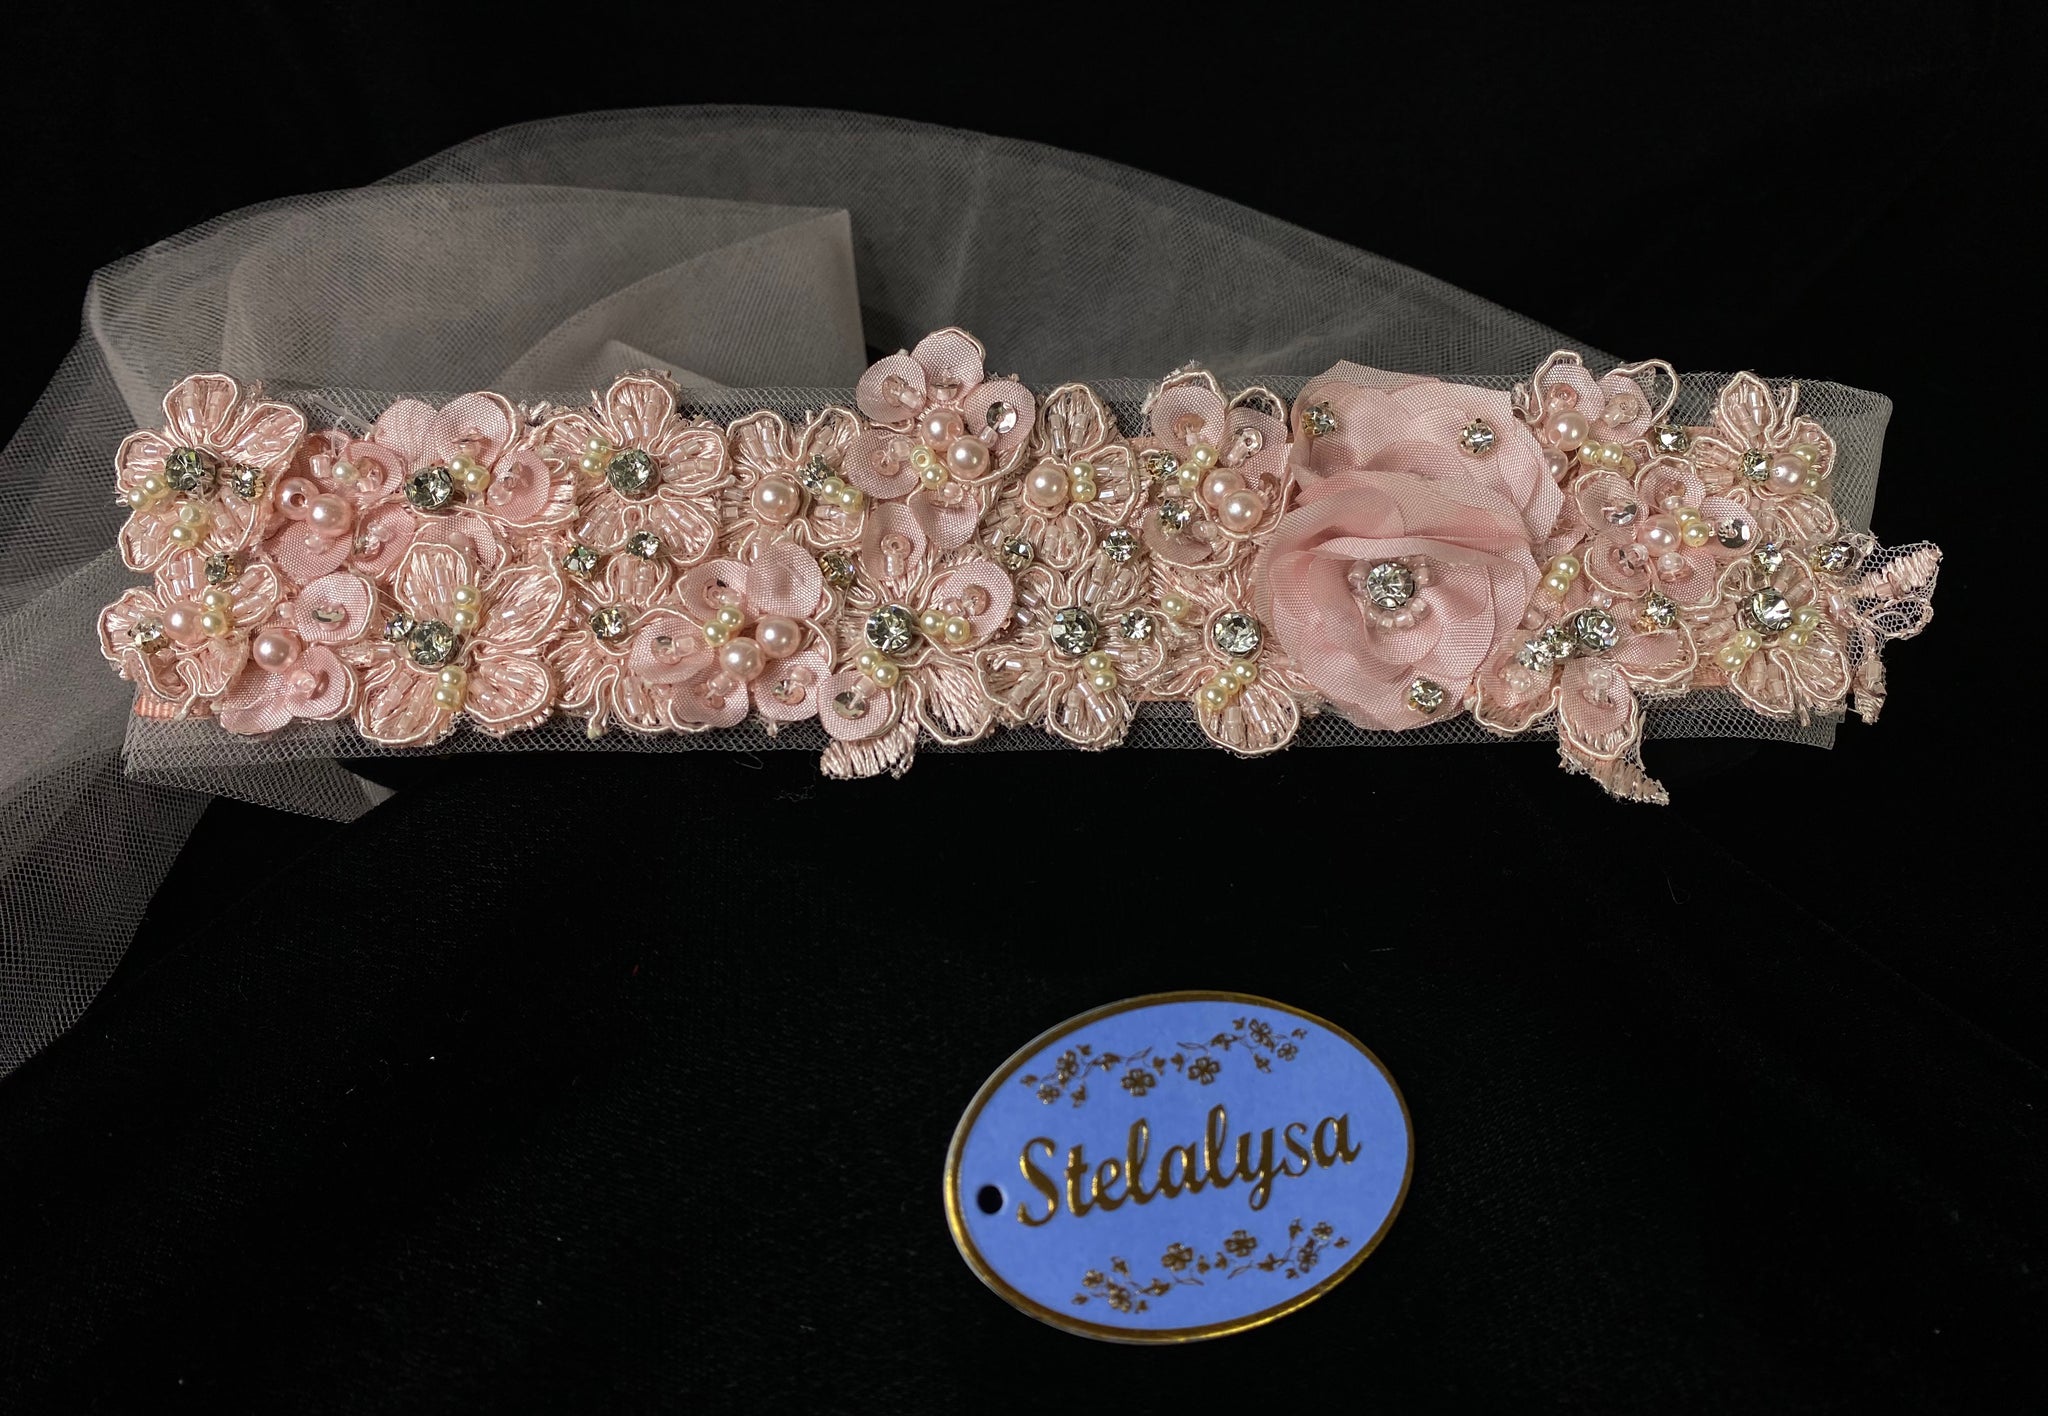 Headband with Strings - Rose Flowers and Tulle Strings  This is an elegant unique handmade and one-of-a-kind headband with a pink flowers and long tulle strings attached.  The pink flowers are uniquely decorated with rhinestones, beads, pearls, and hand stitched flowers. 